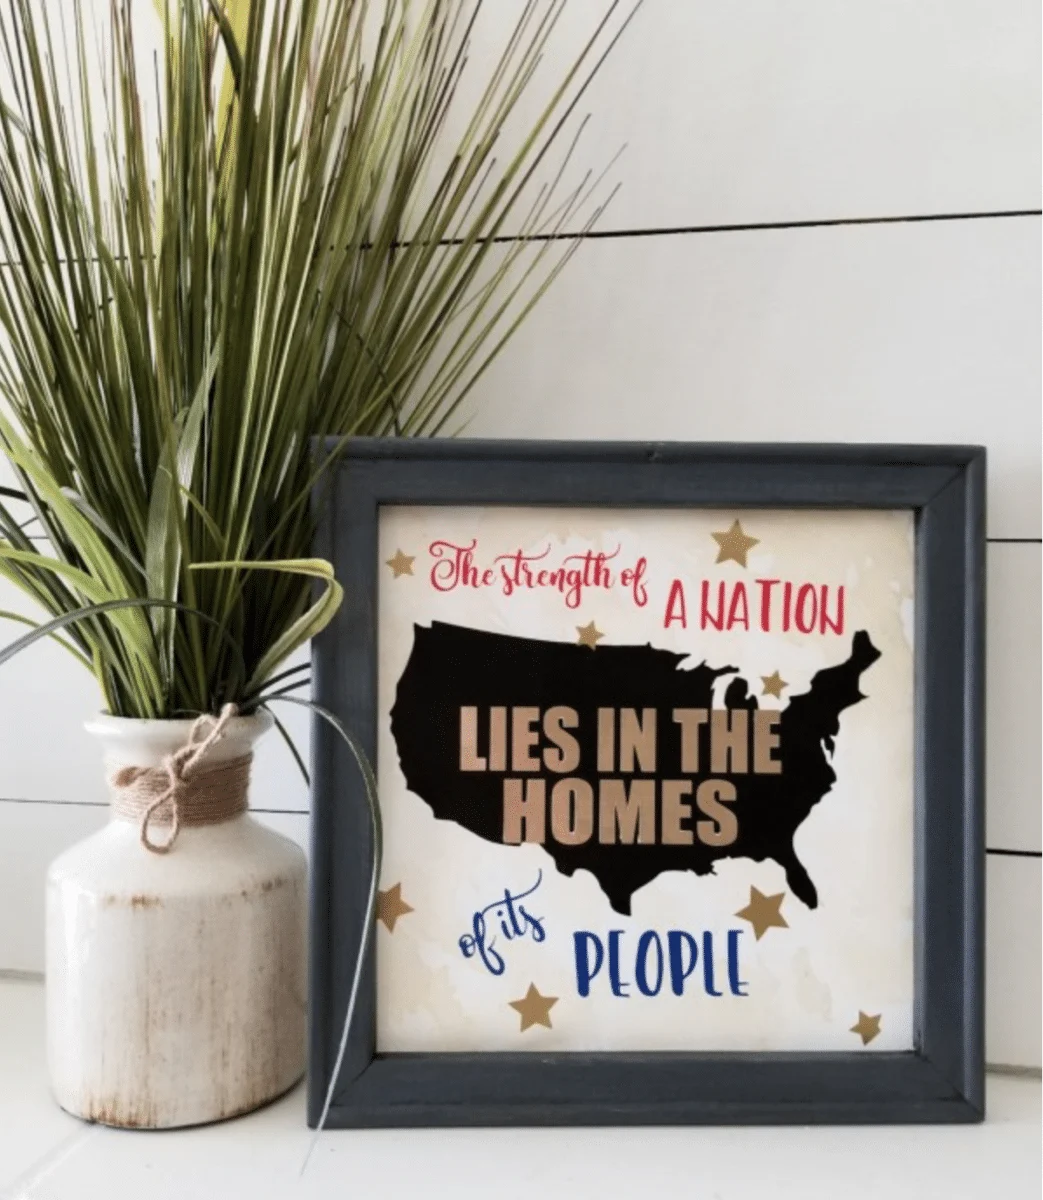 A framed quote reading "the strength of a nation lies in the homes of its people," placed next to a vase with a Fourth of July themed plant.